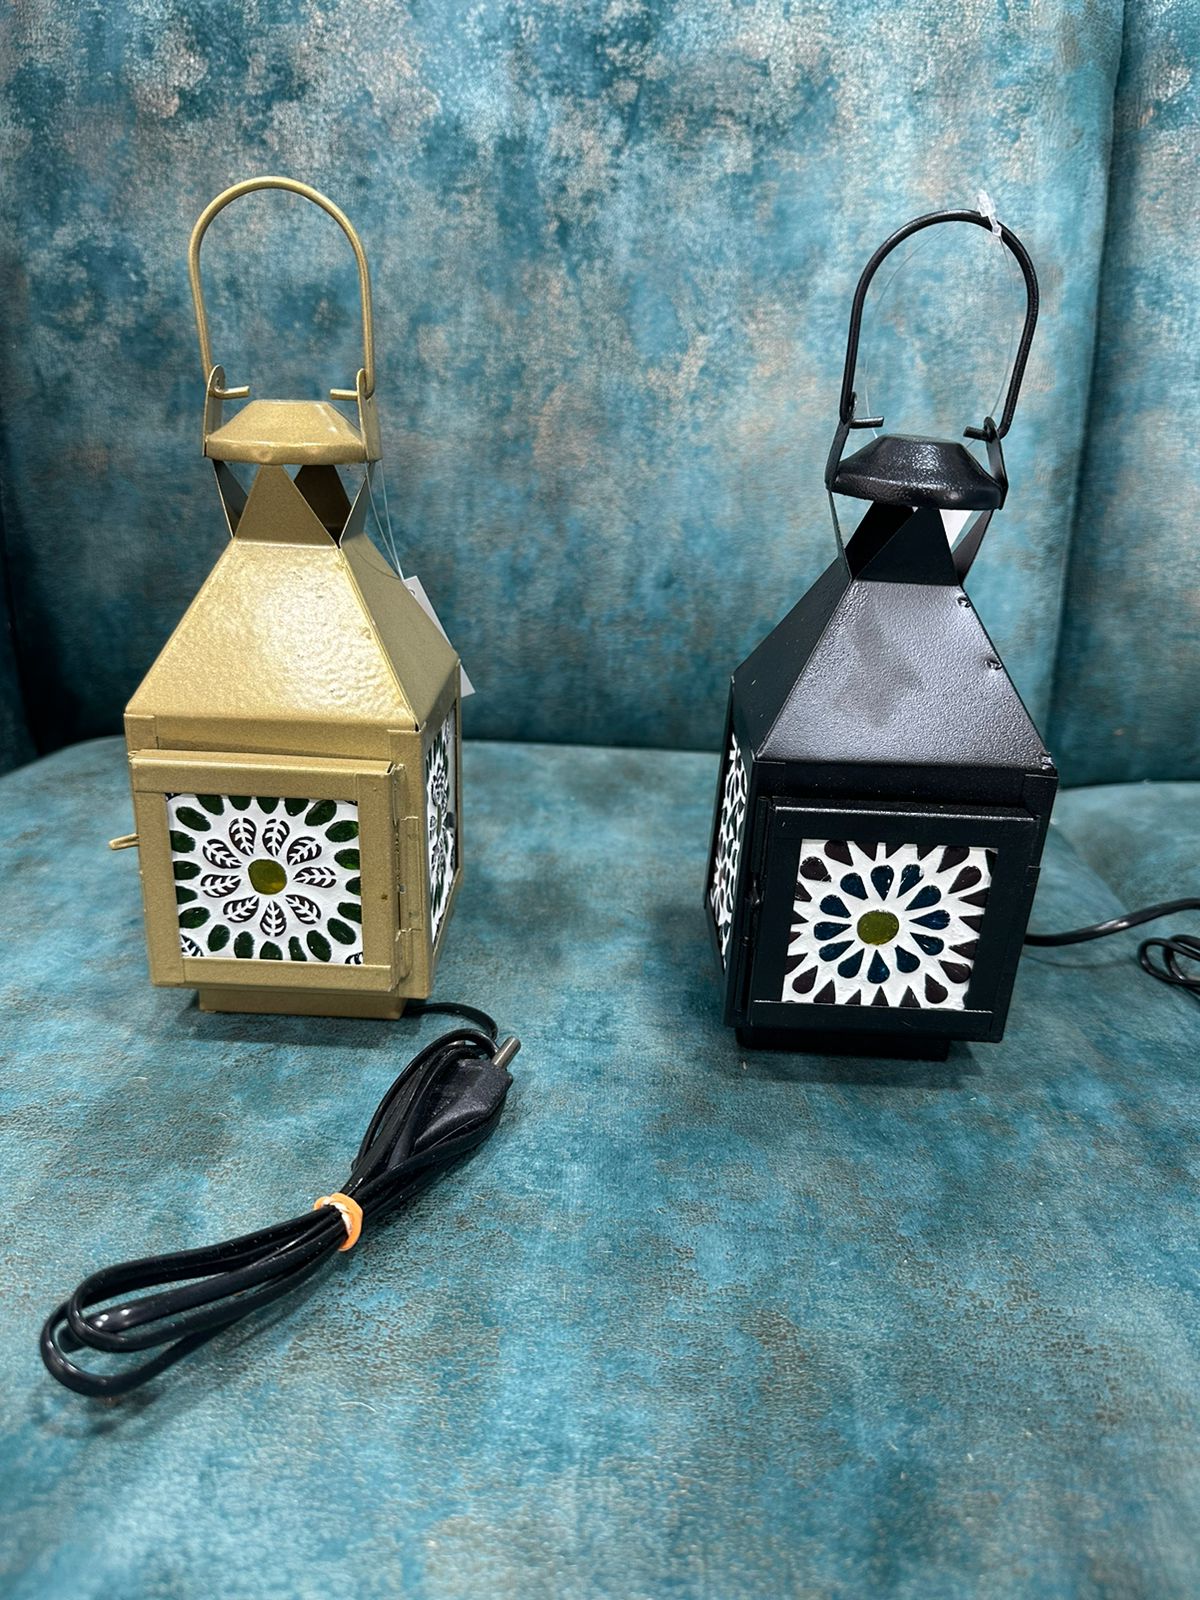 Lantern Designed Hanging Lamps With Colorful Glass Art Handmade By Tamrapatra